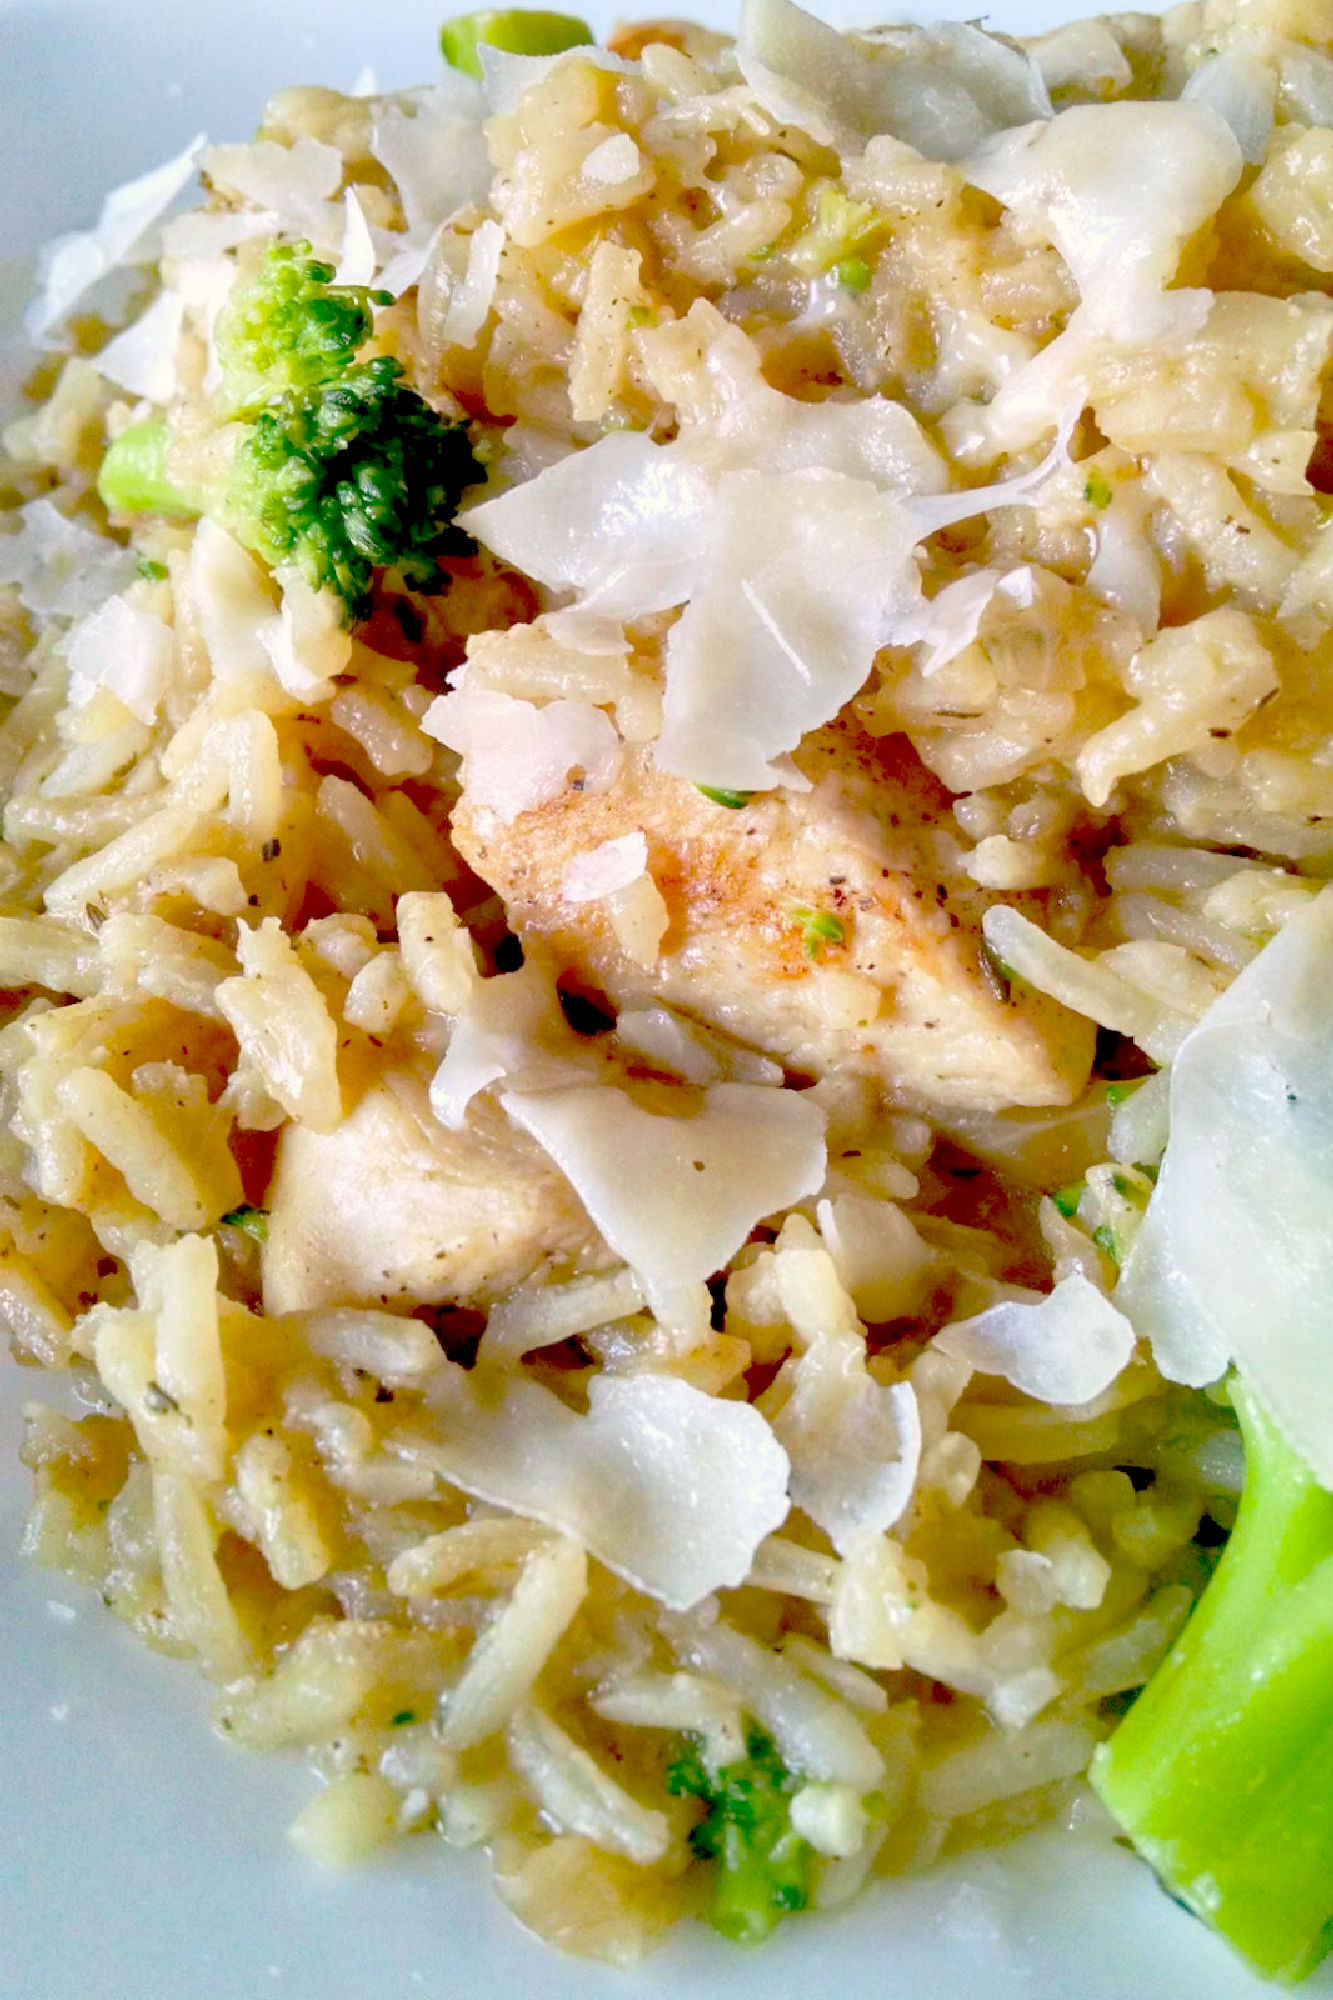 A delicious one skillet meal, this Cheesy Broccoli Chicken and Rice is hearty and full of flavor. Your picky eaters won't mind eating broccoli in this dish! #OurFamilyTable